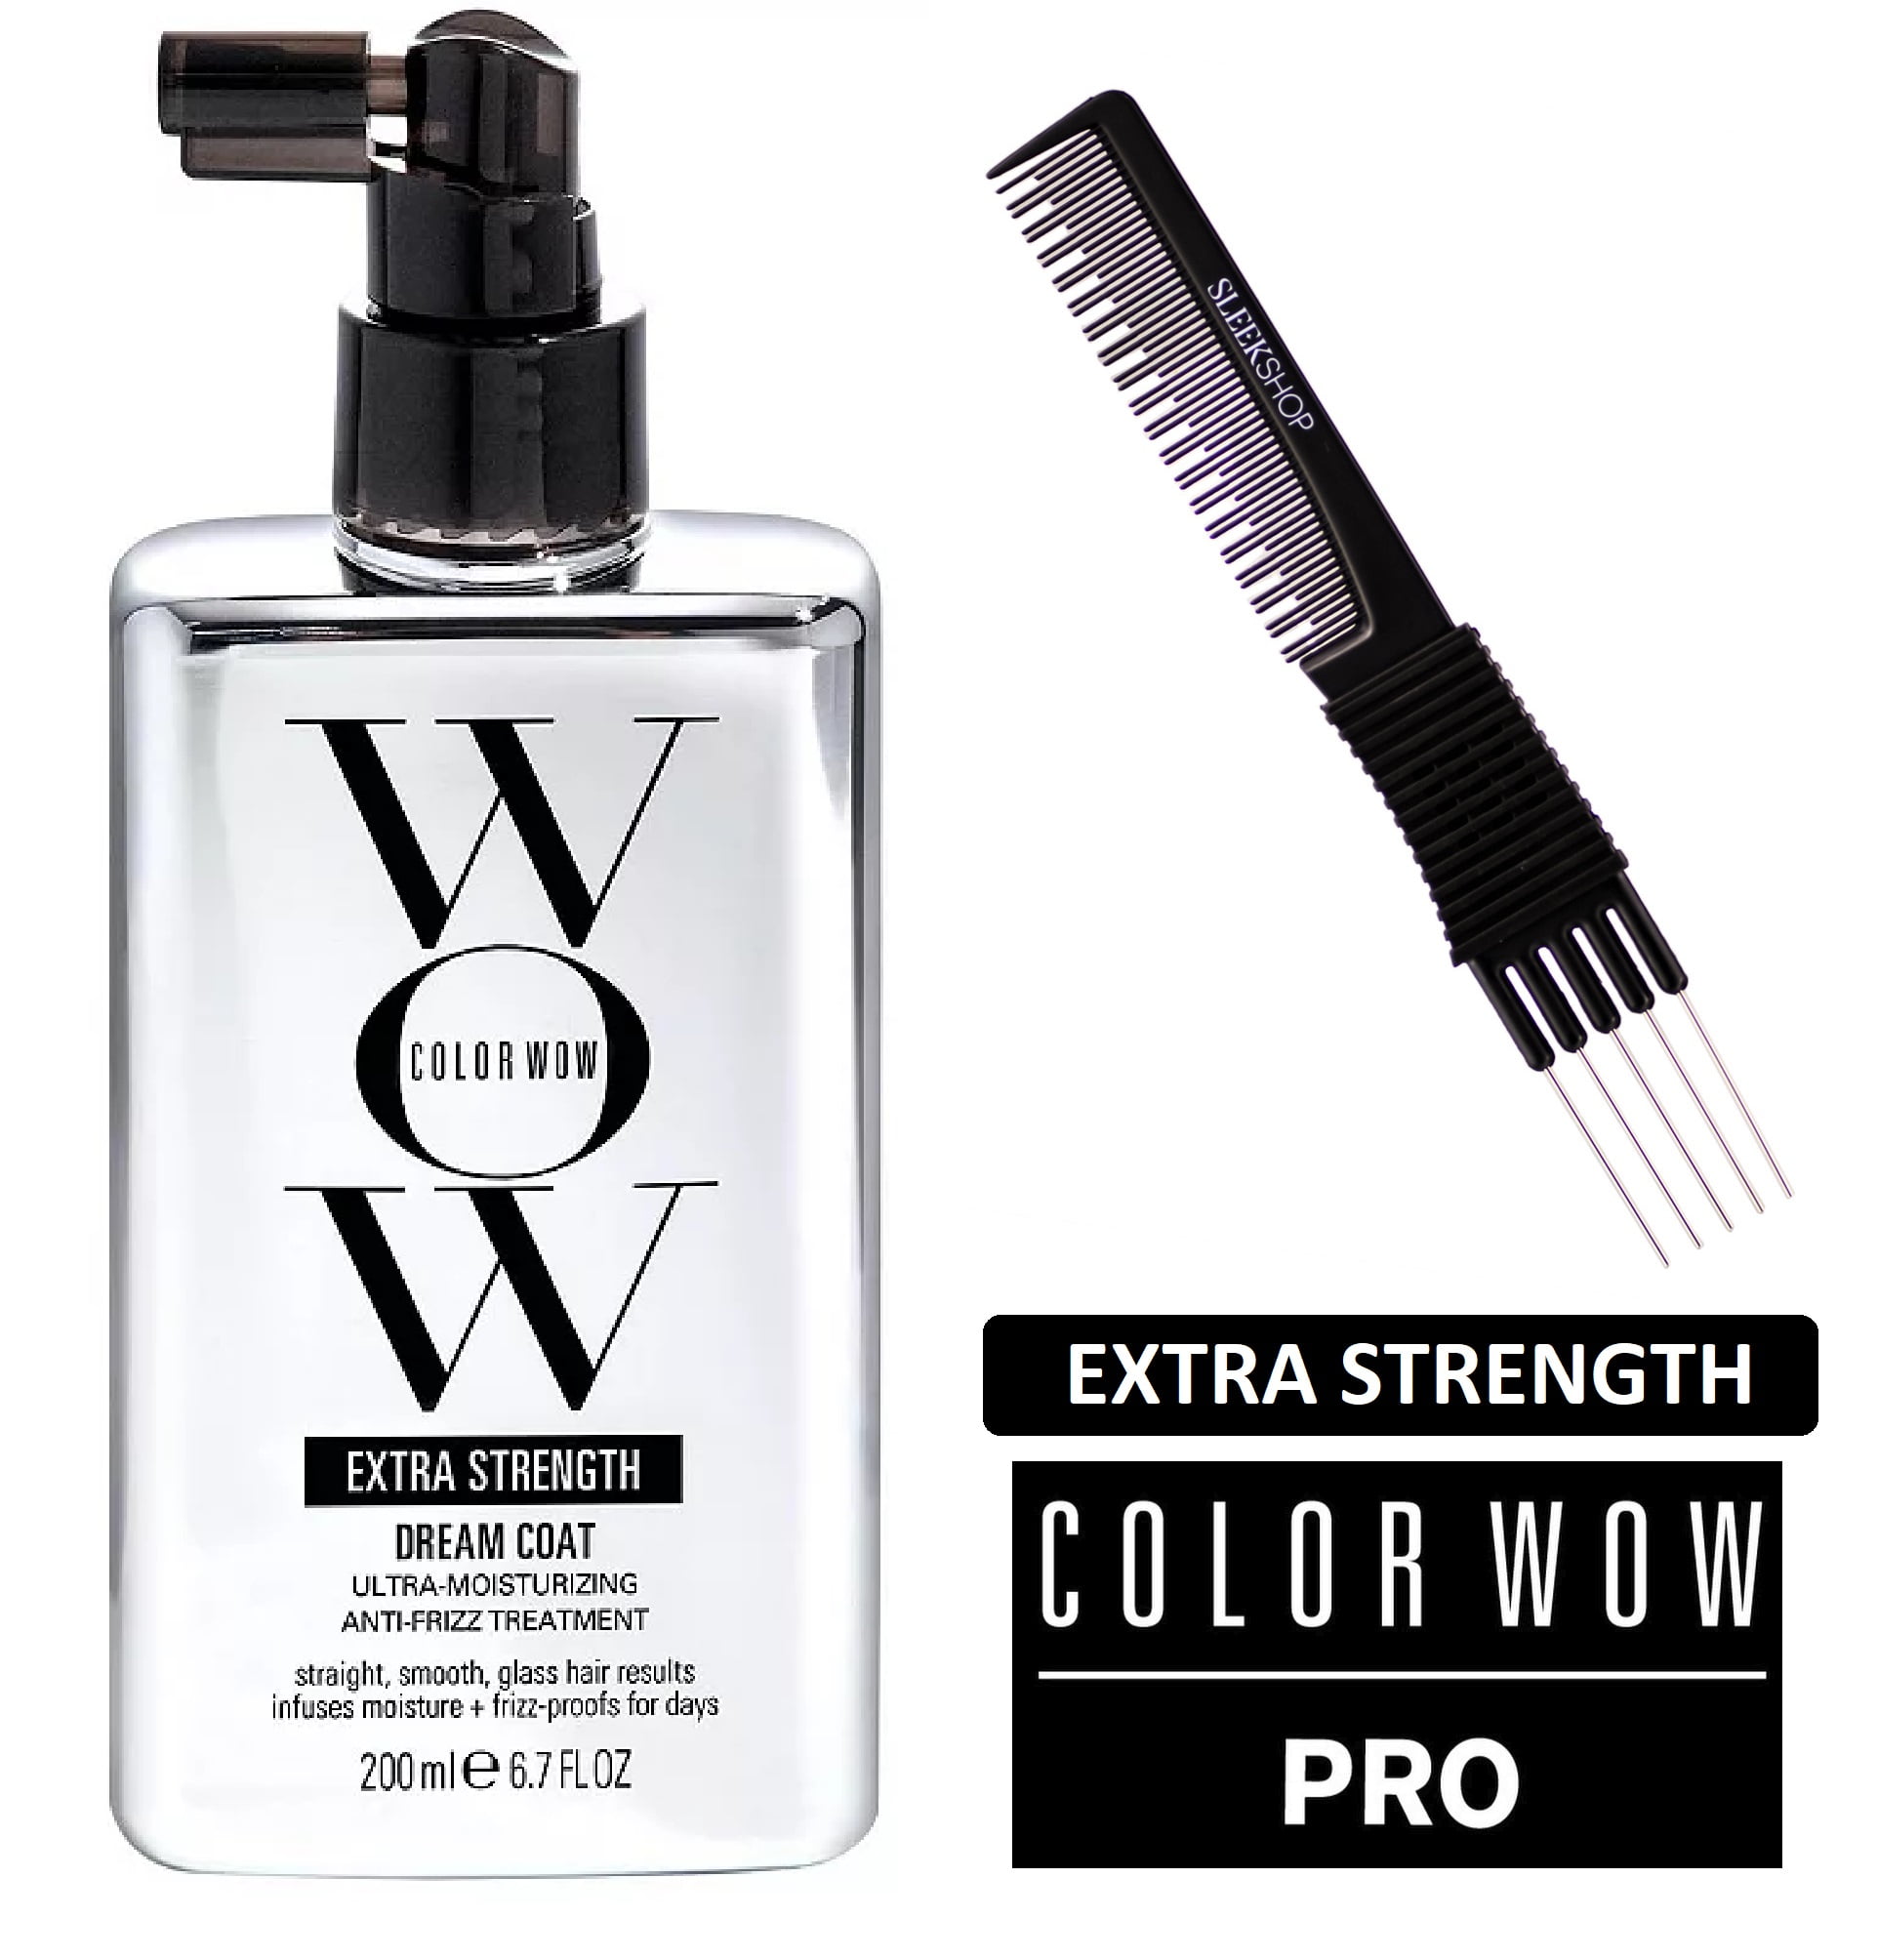 COLOR WOW Extra Shine Spray - Lightweight & Non-Greasy Formula | Heat  Protection, Frizz Control, and Silky Hair | For All Hair Types